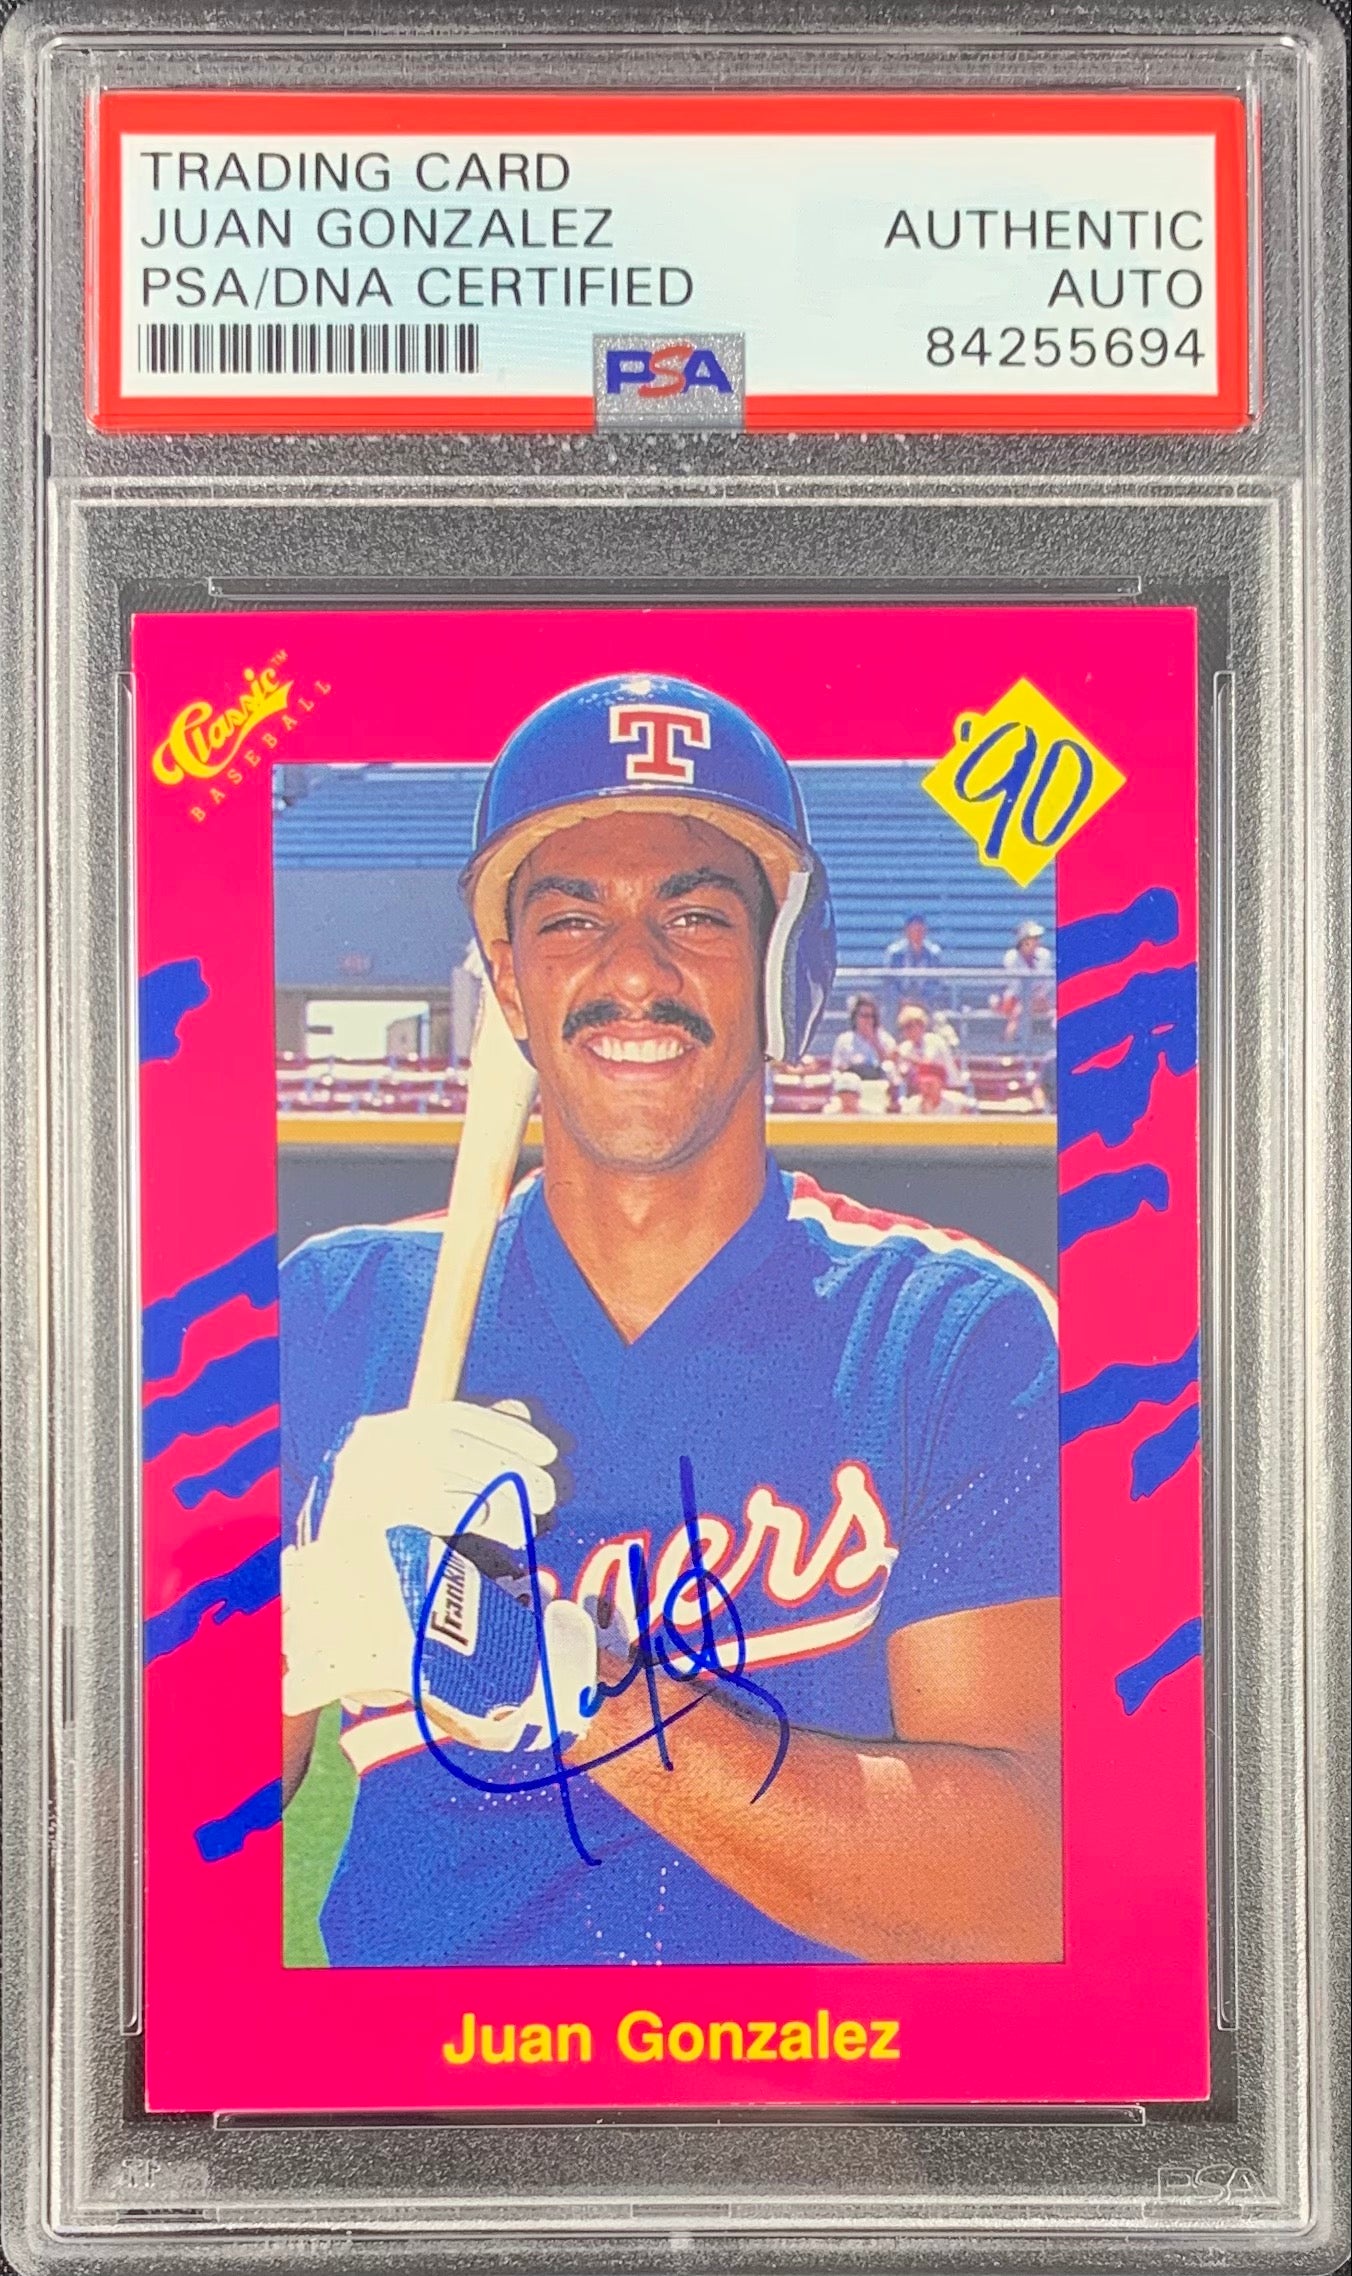 Texas Rangers Baseball Cards, Rangers Trading Cards, Autographed